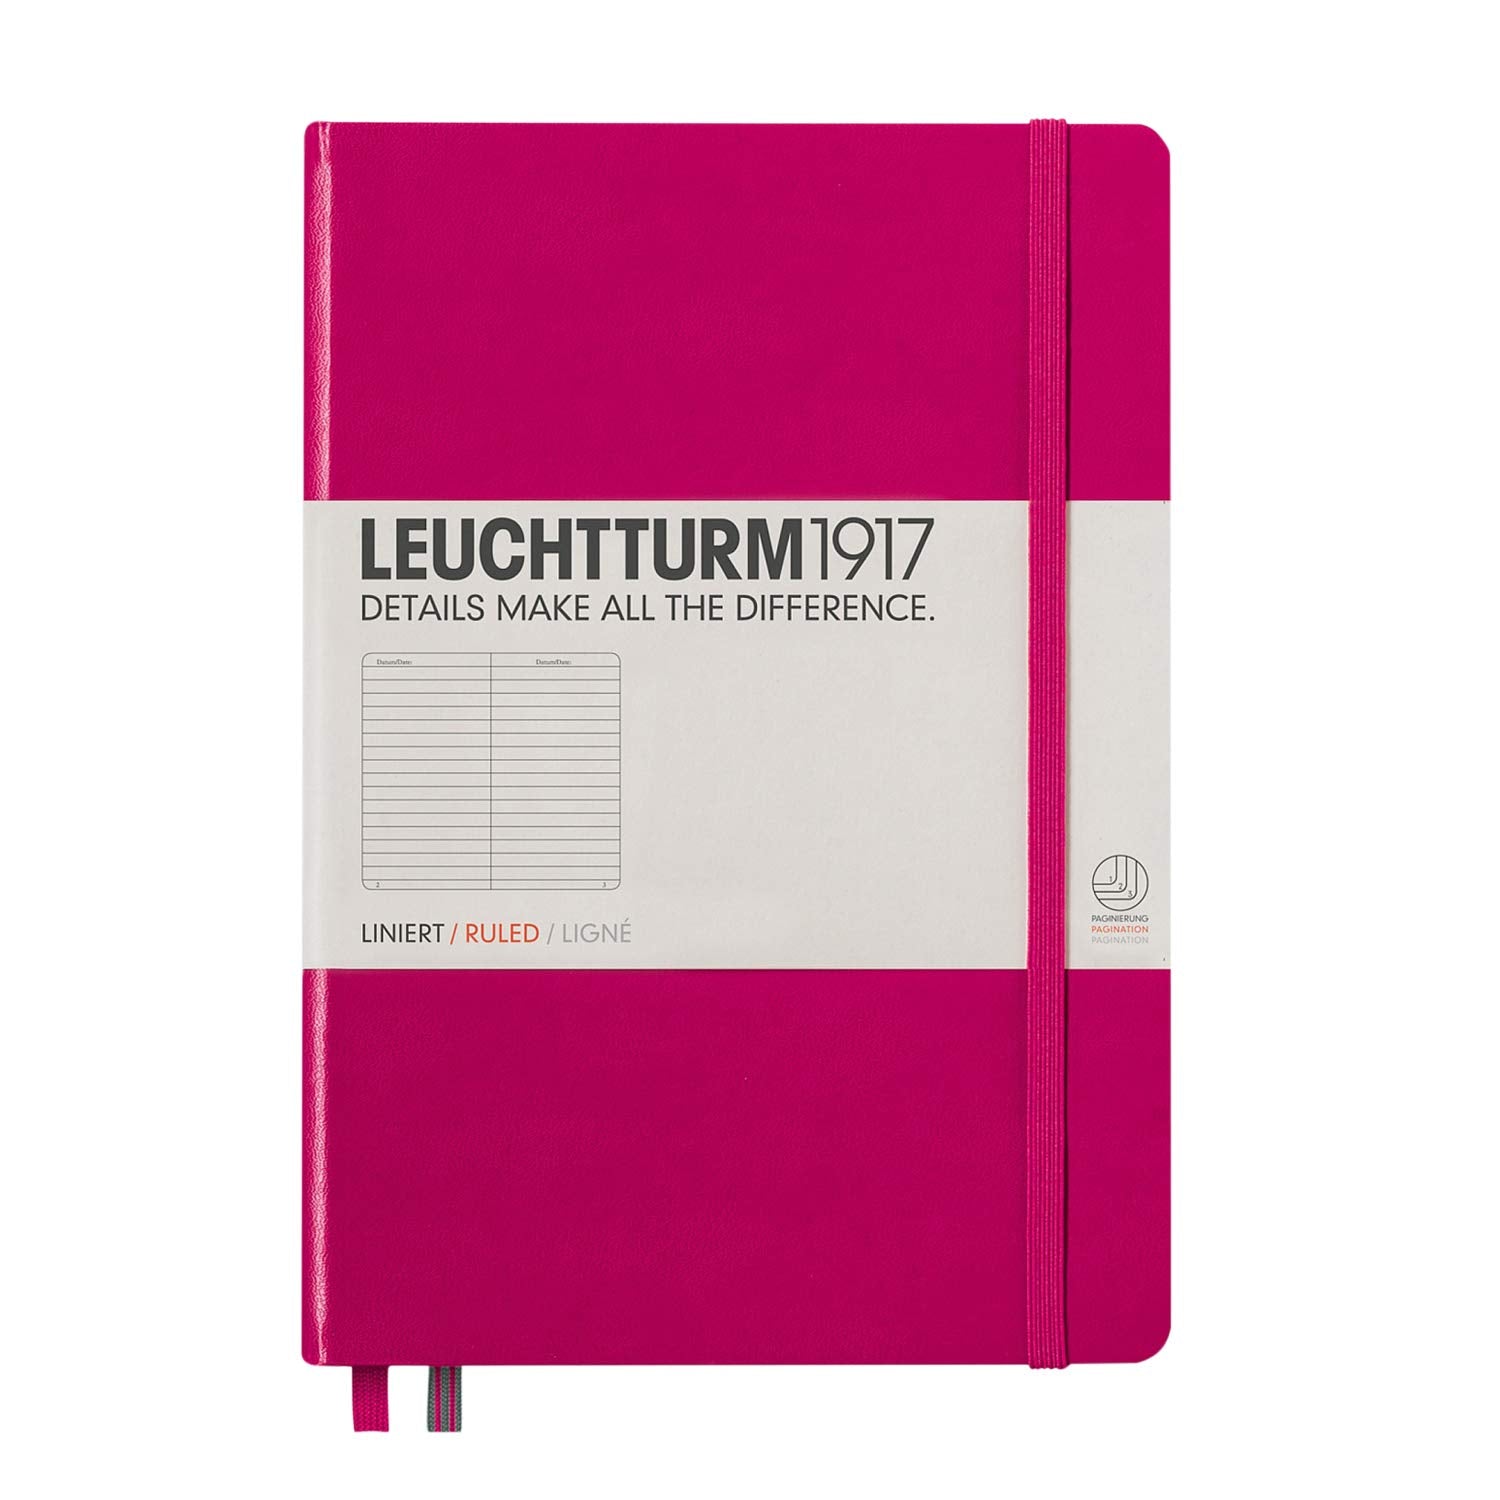 Leuchtturm1917 Medium A5 Ruled Hardcover Notebook (Berry) - 249 Numbered Pages